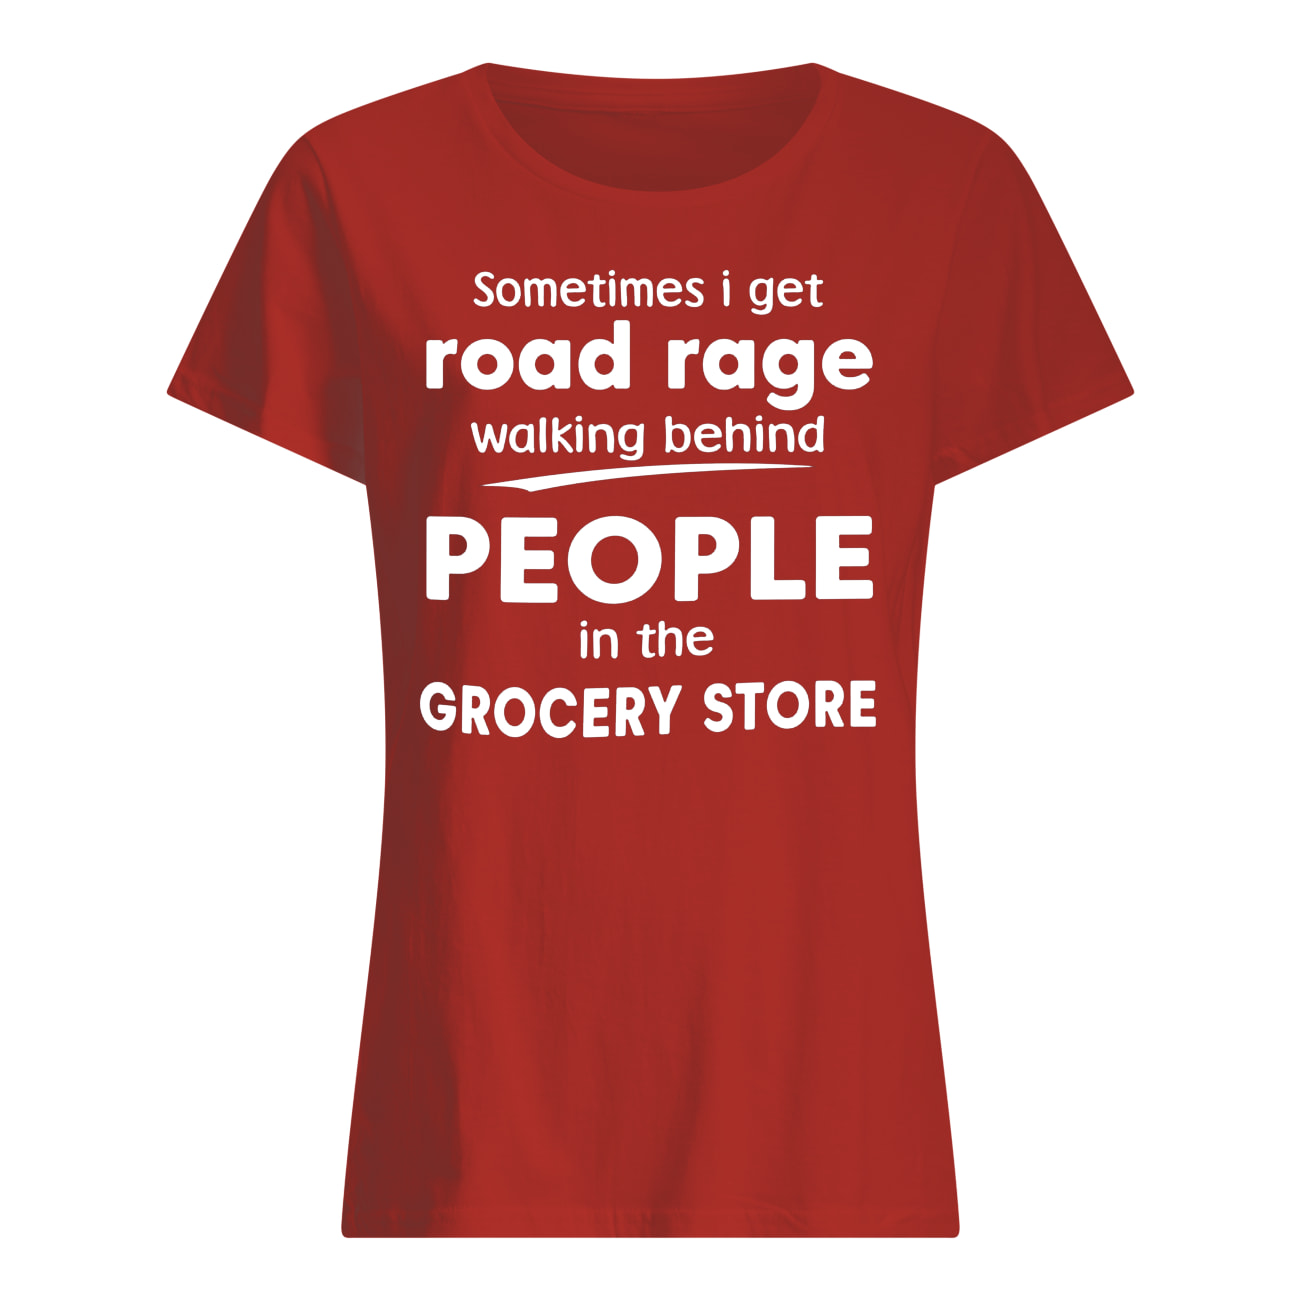 Sometimes I get road rage walking behind people in the grocery store womens shirt